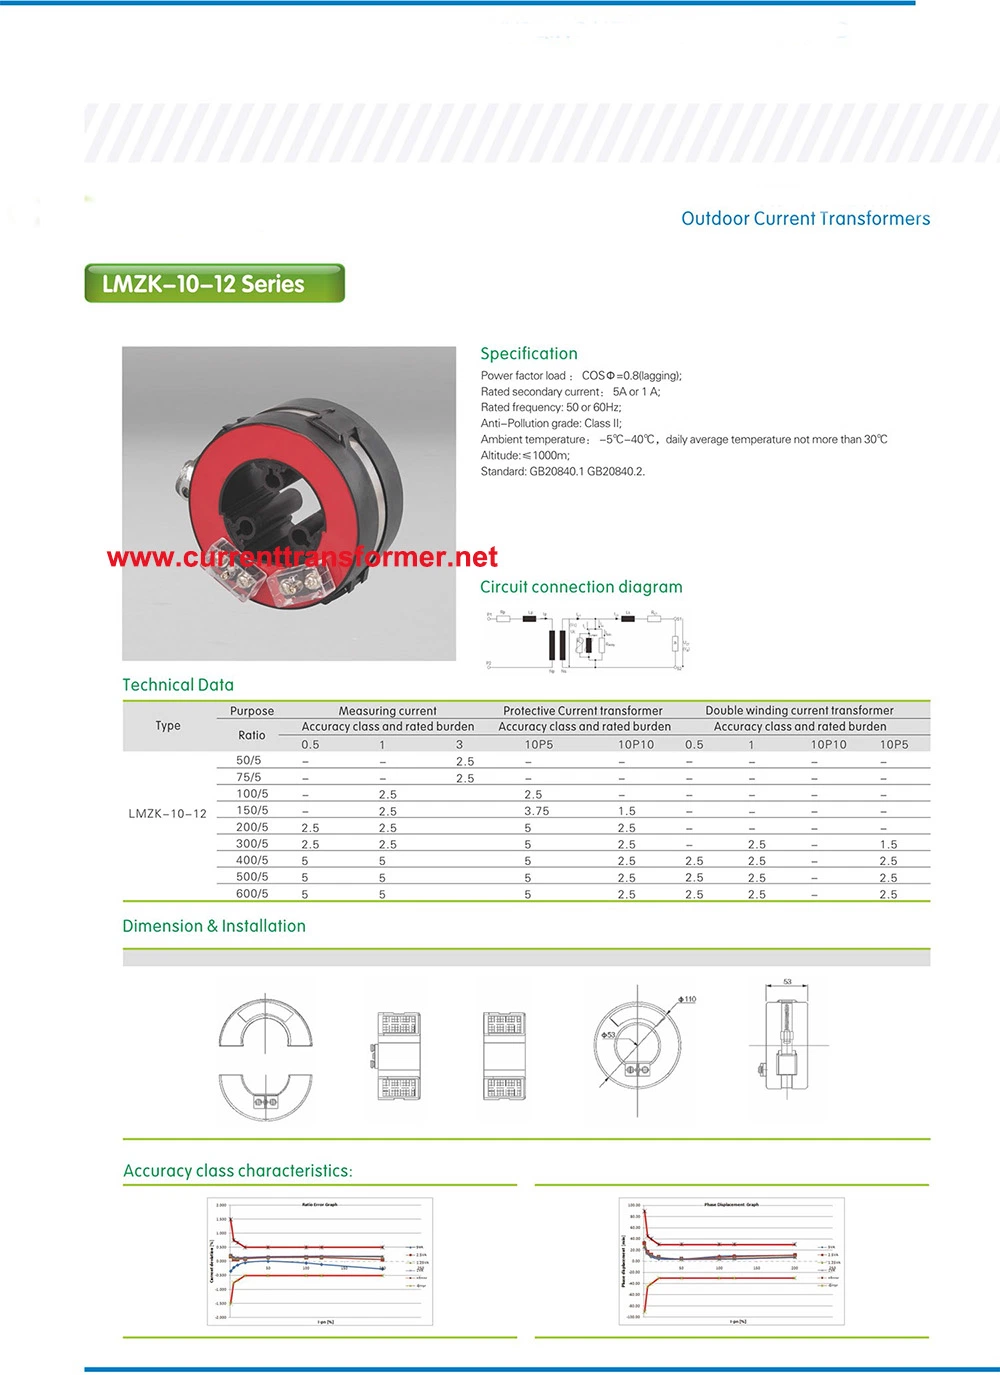 Lmzk-10-12 Series Outdoor Low Voltage Current Transformer with 50A-600A